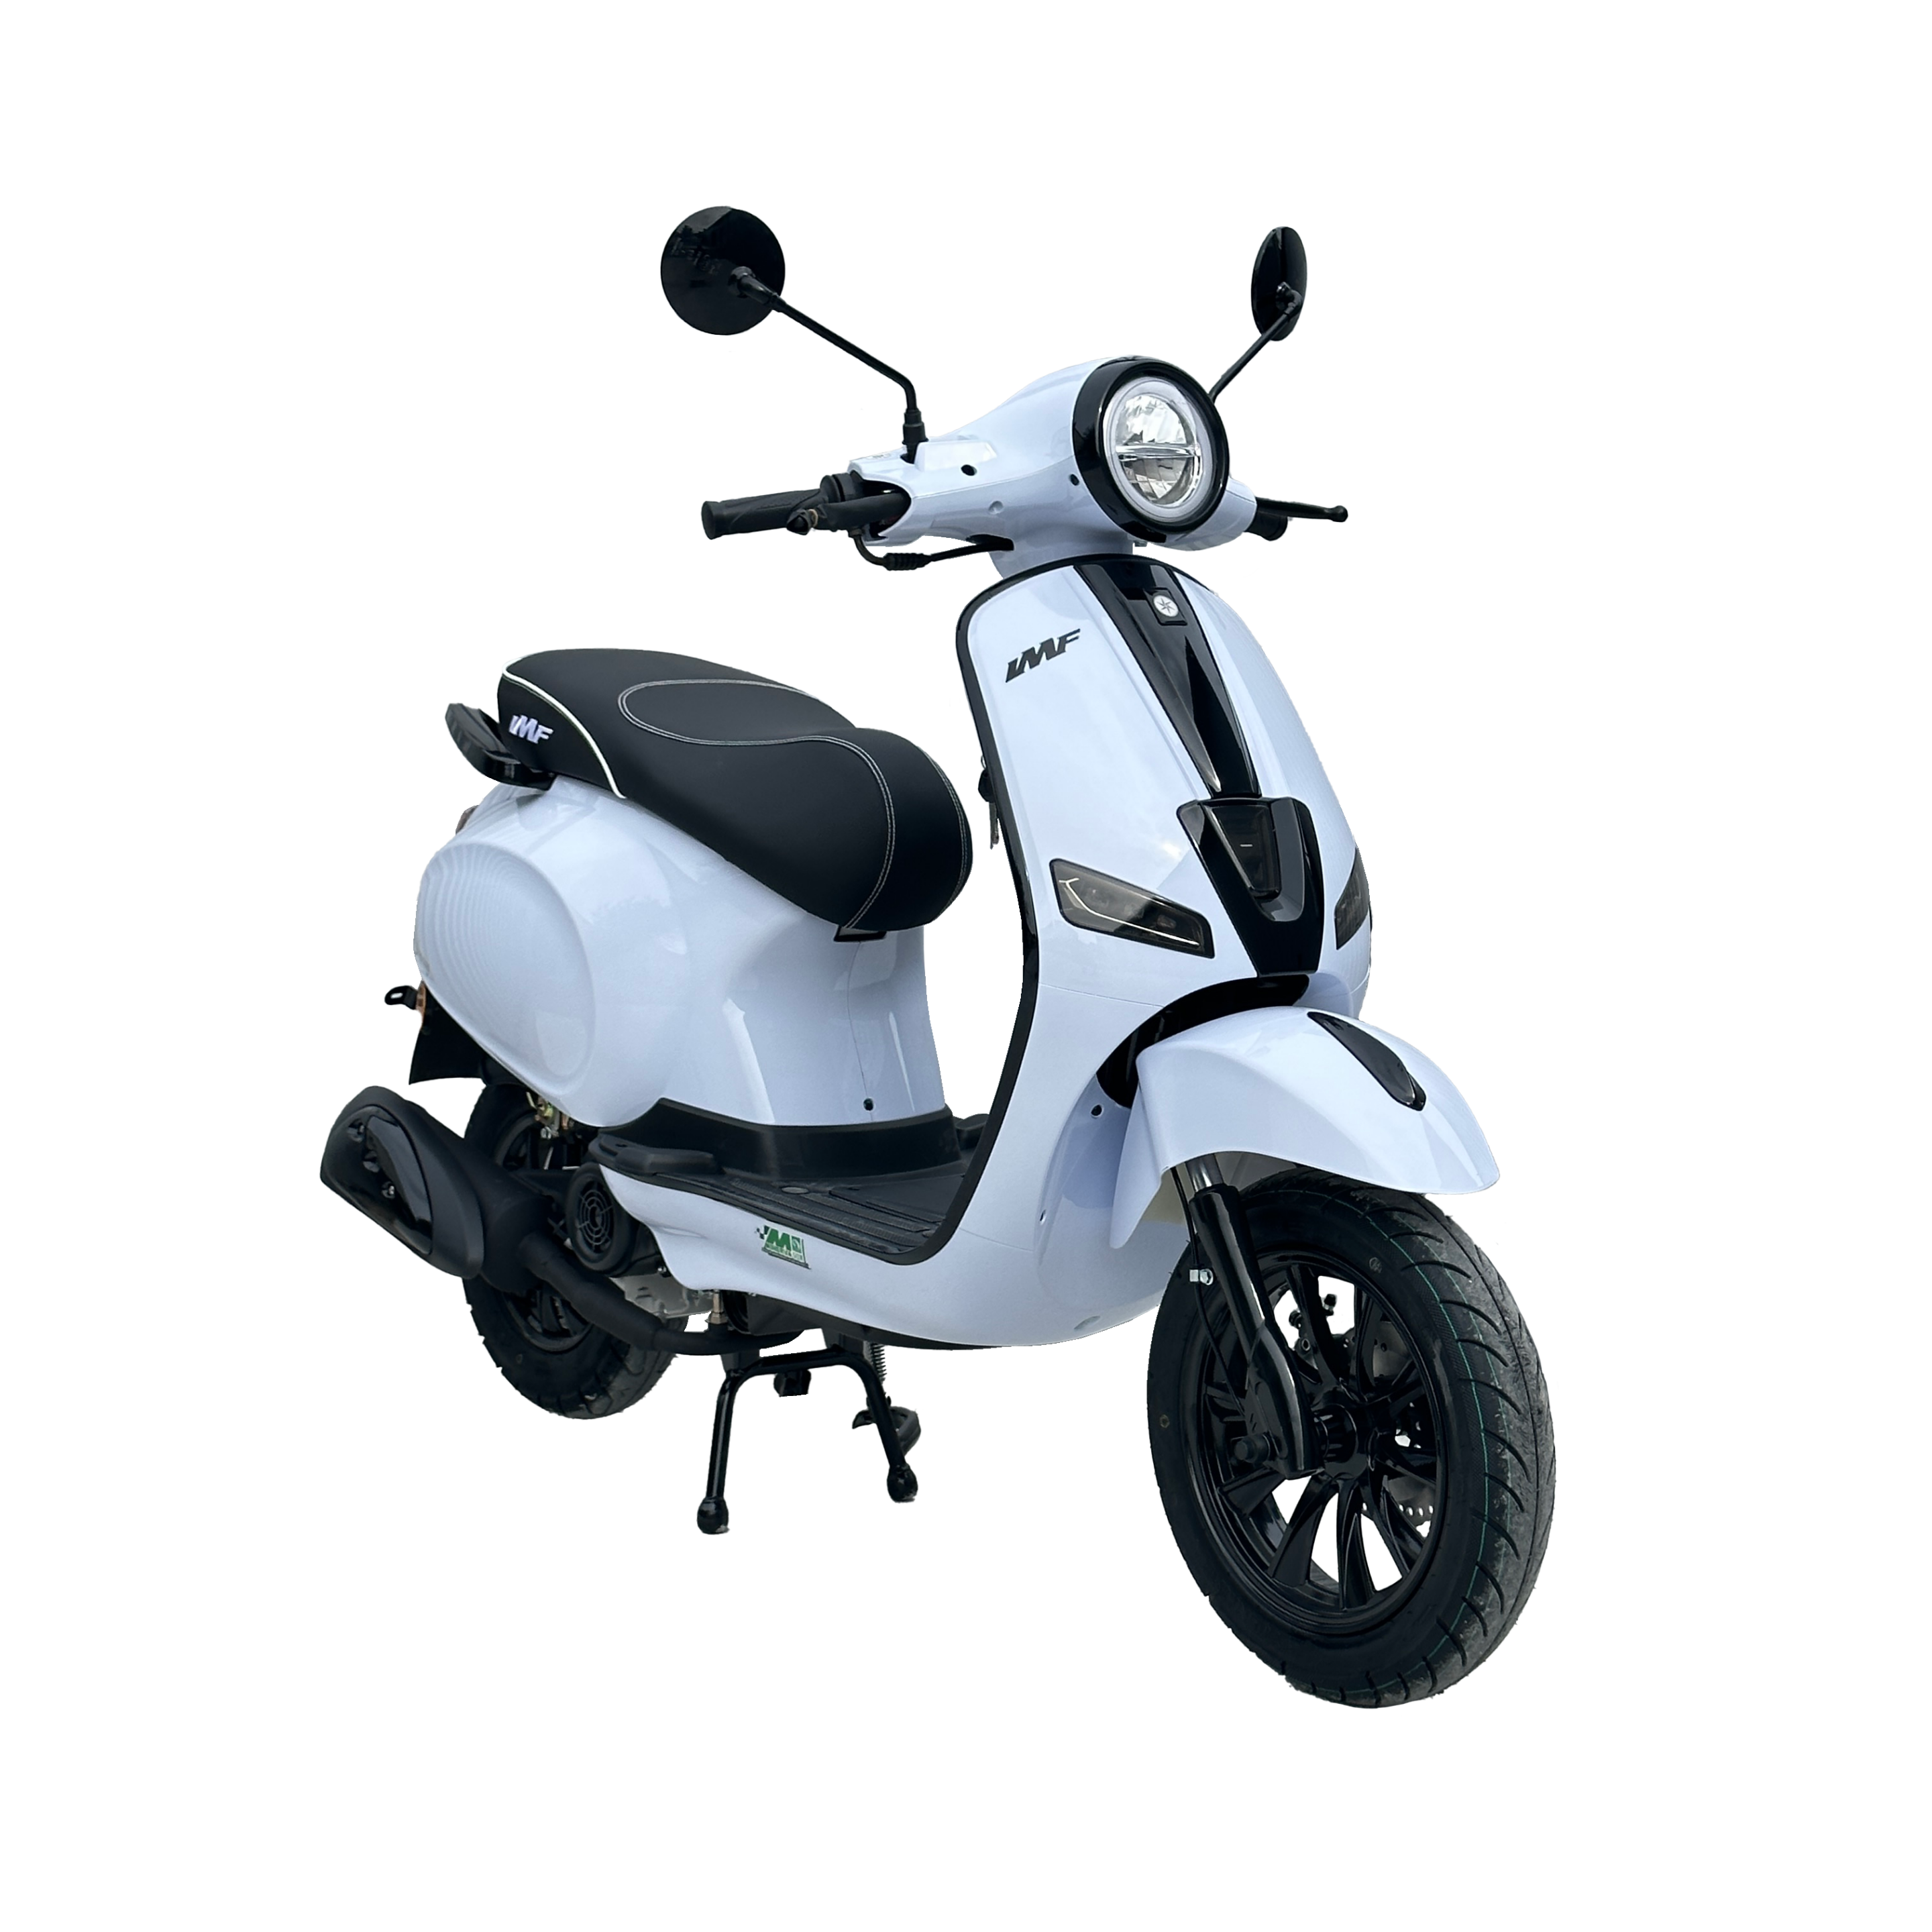 IMF INDUSTRIE - scooter -scooter thermique - 100% moto - Peugeot - SYM - KYMCO 